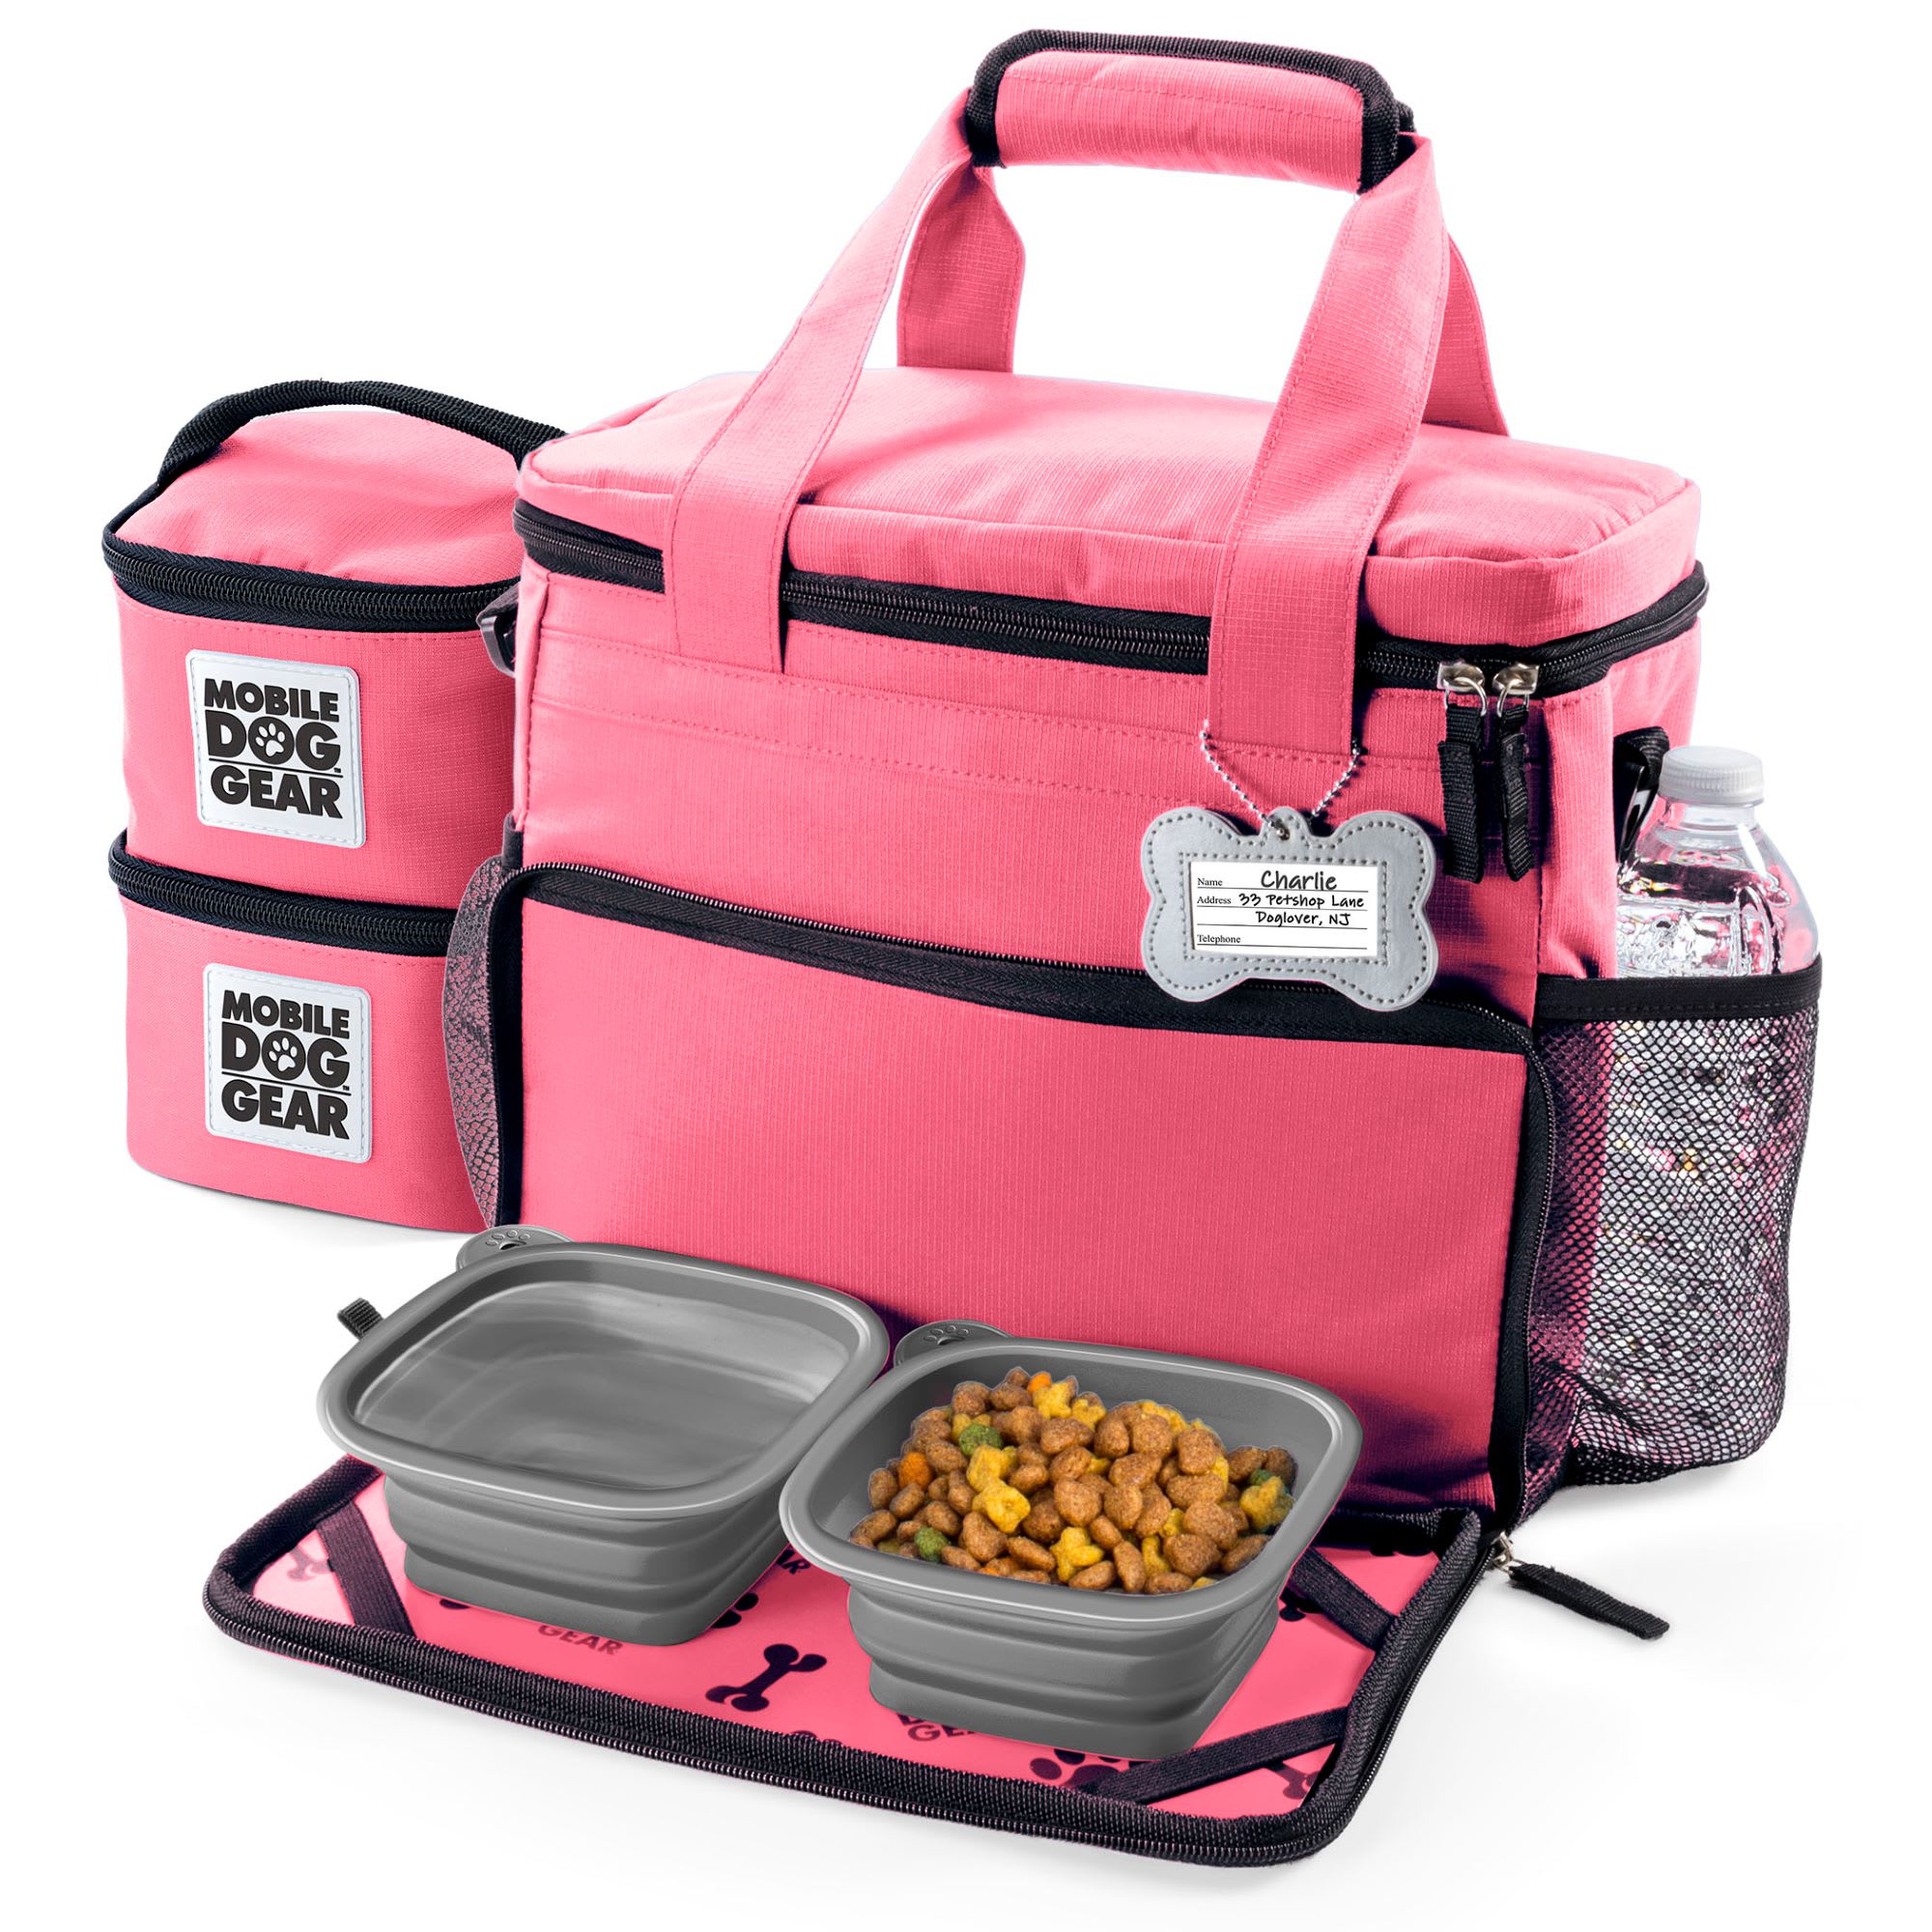 Photos - Backpack Mobile Dog Gear Mobile Dog Gear Pink Week Away Bag, Small, Pink ODG28